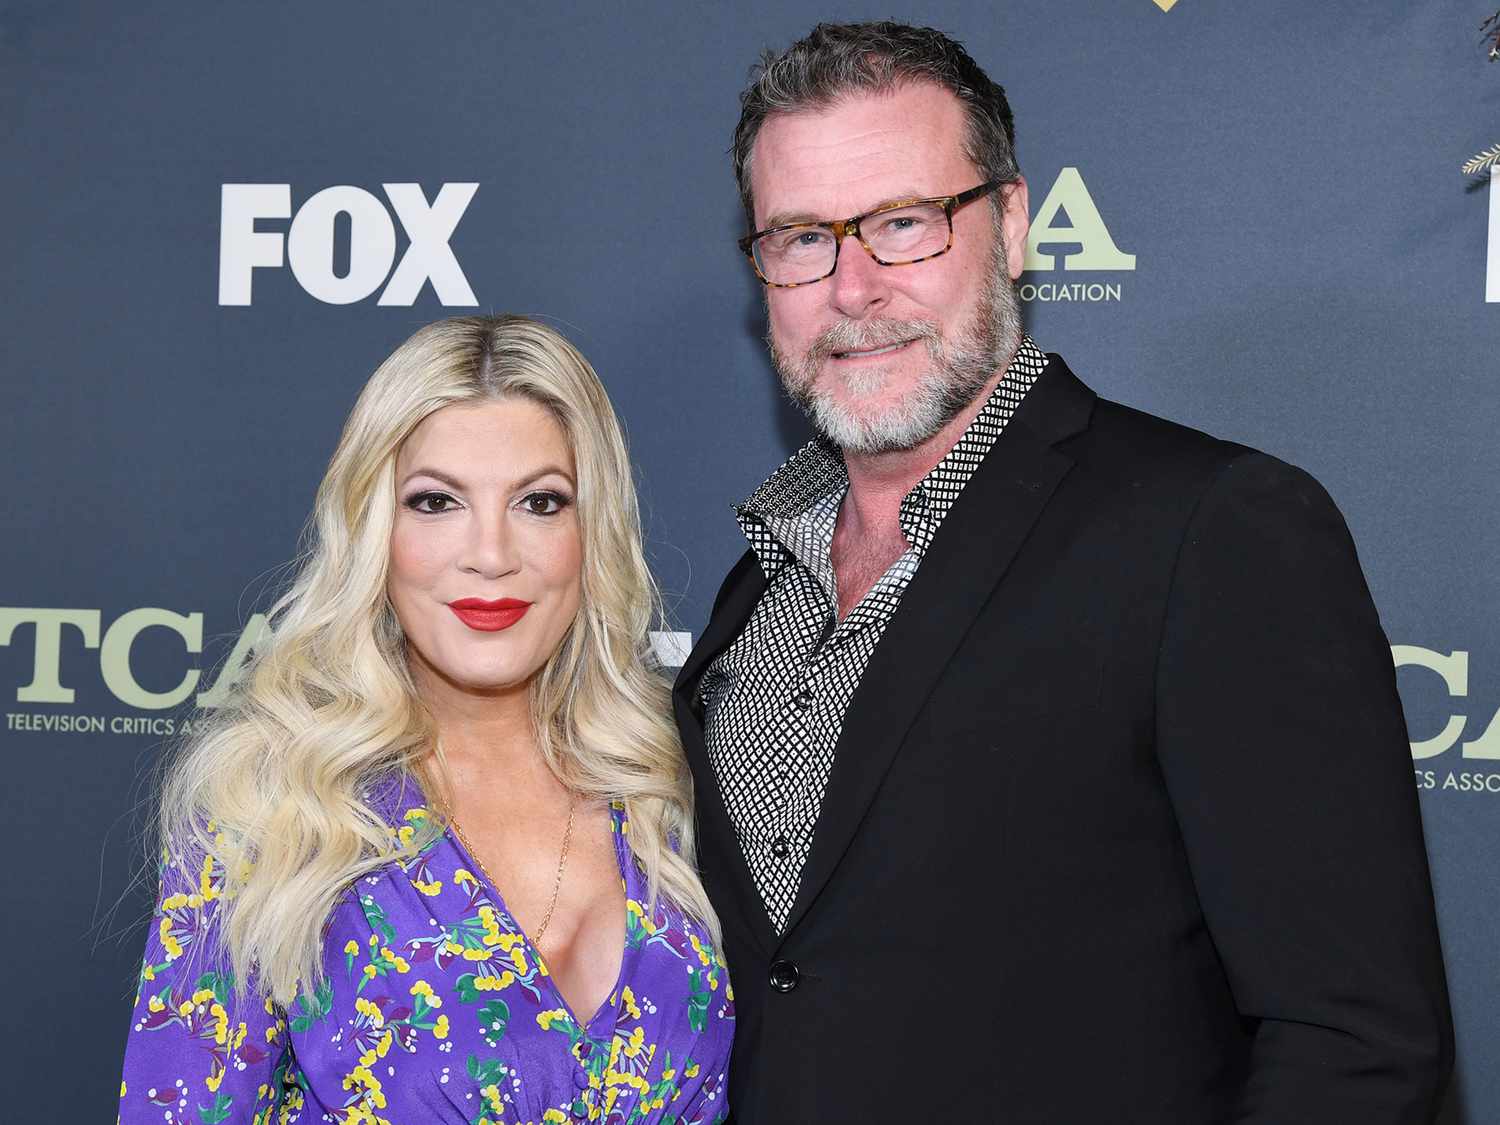 Tori Spelling Is Ready to 'Move on' from Ex Dean McDermott as She Celebrates Her 51st Birthday: Source